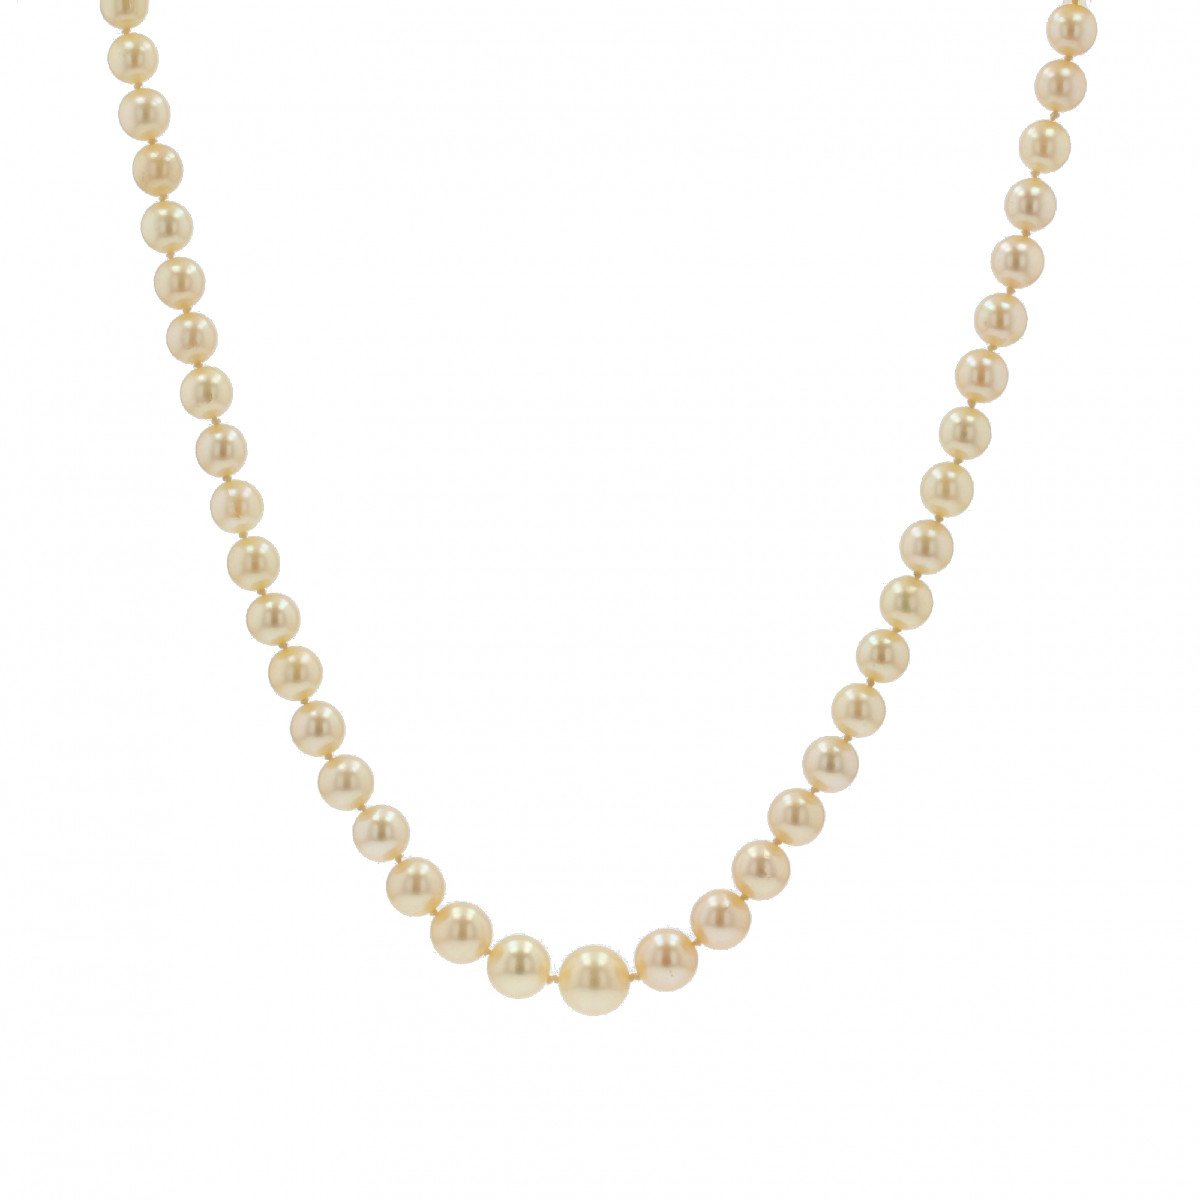 Necklace Falling Golden Cultured Pearls